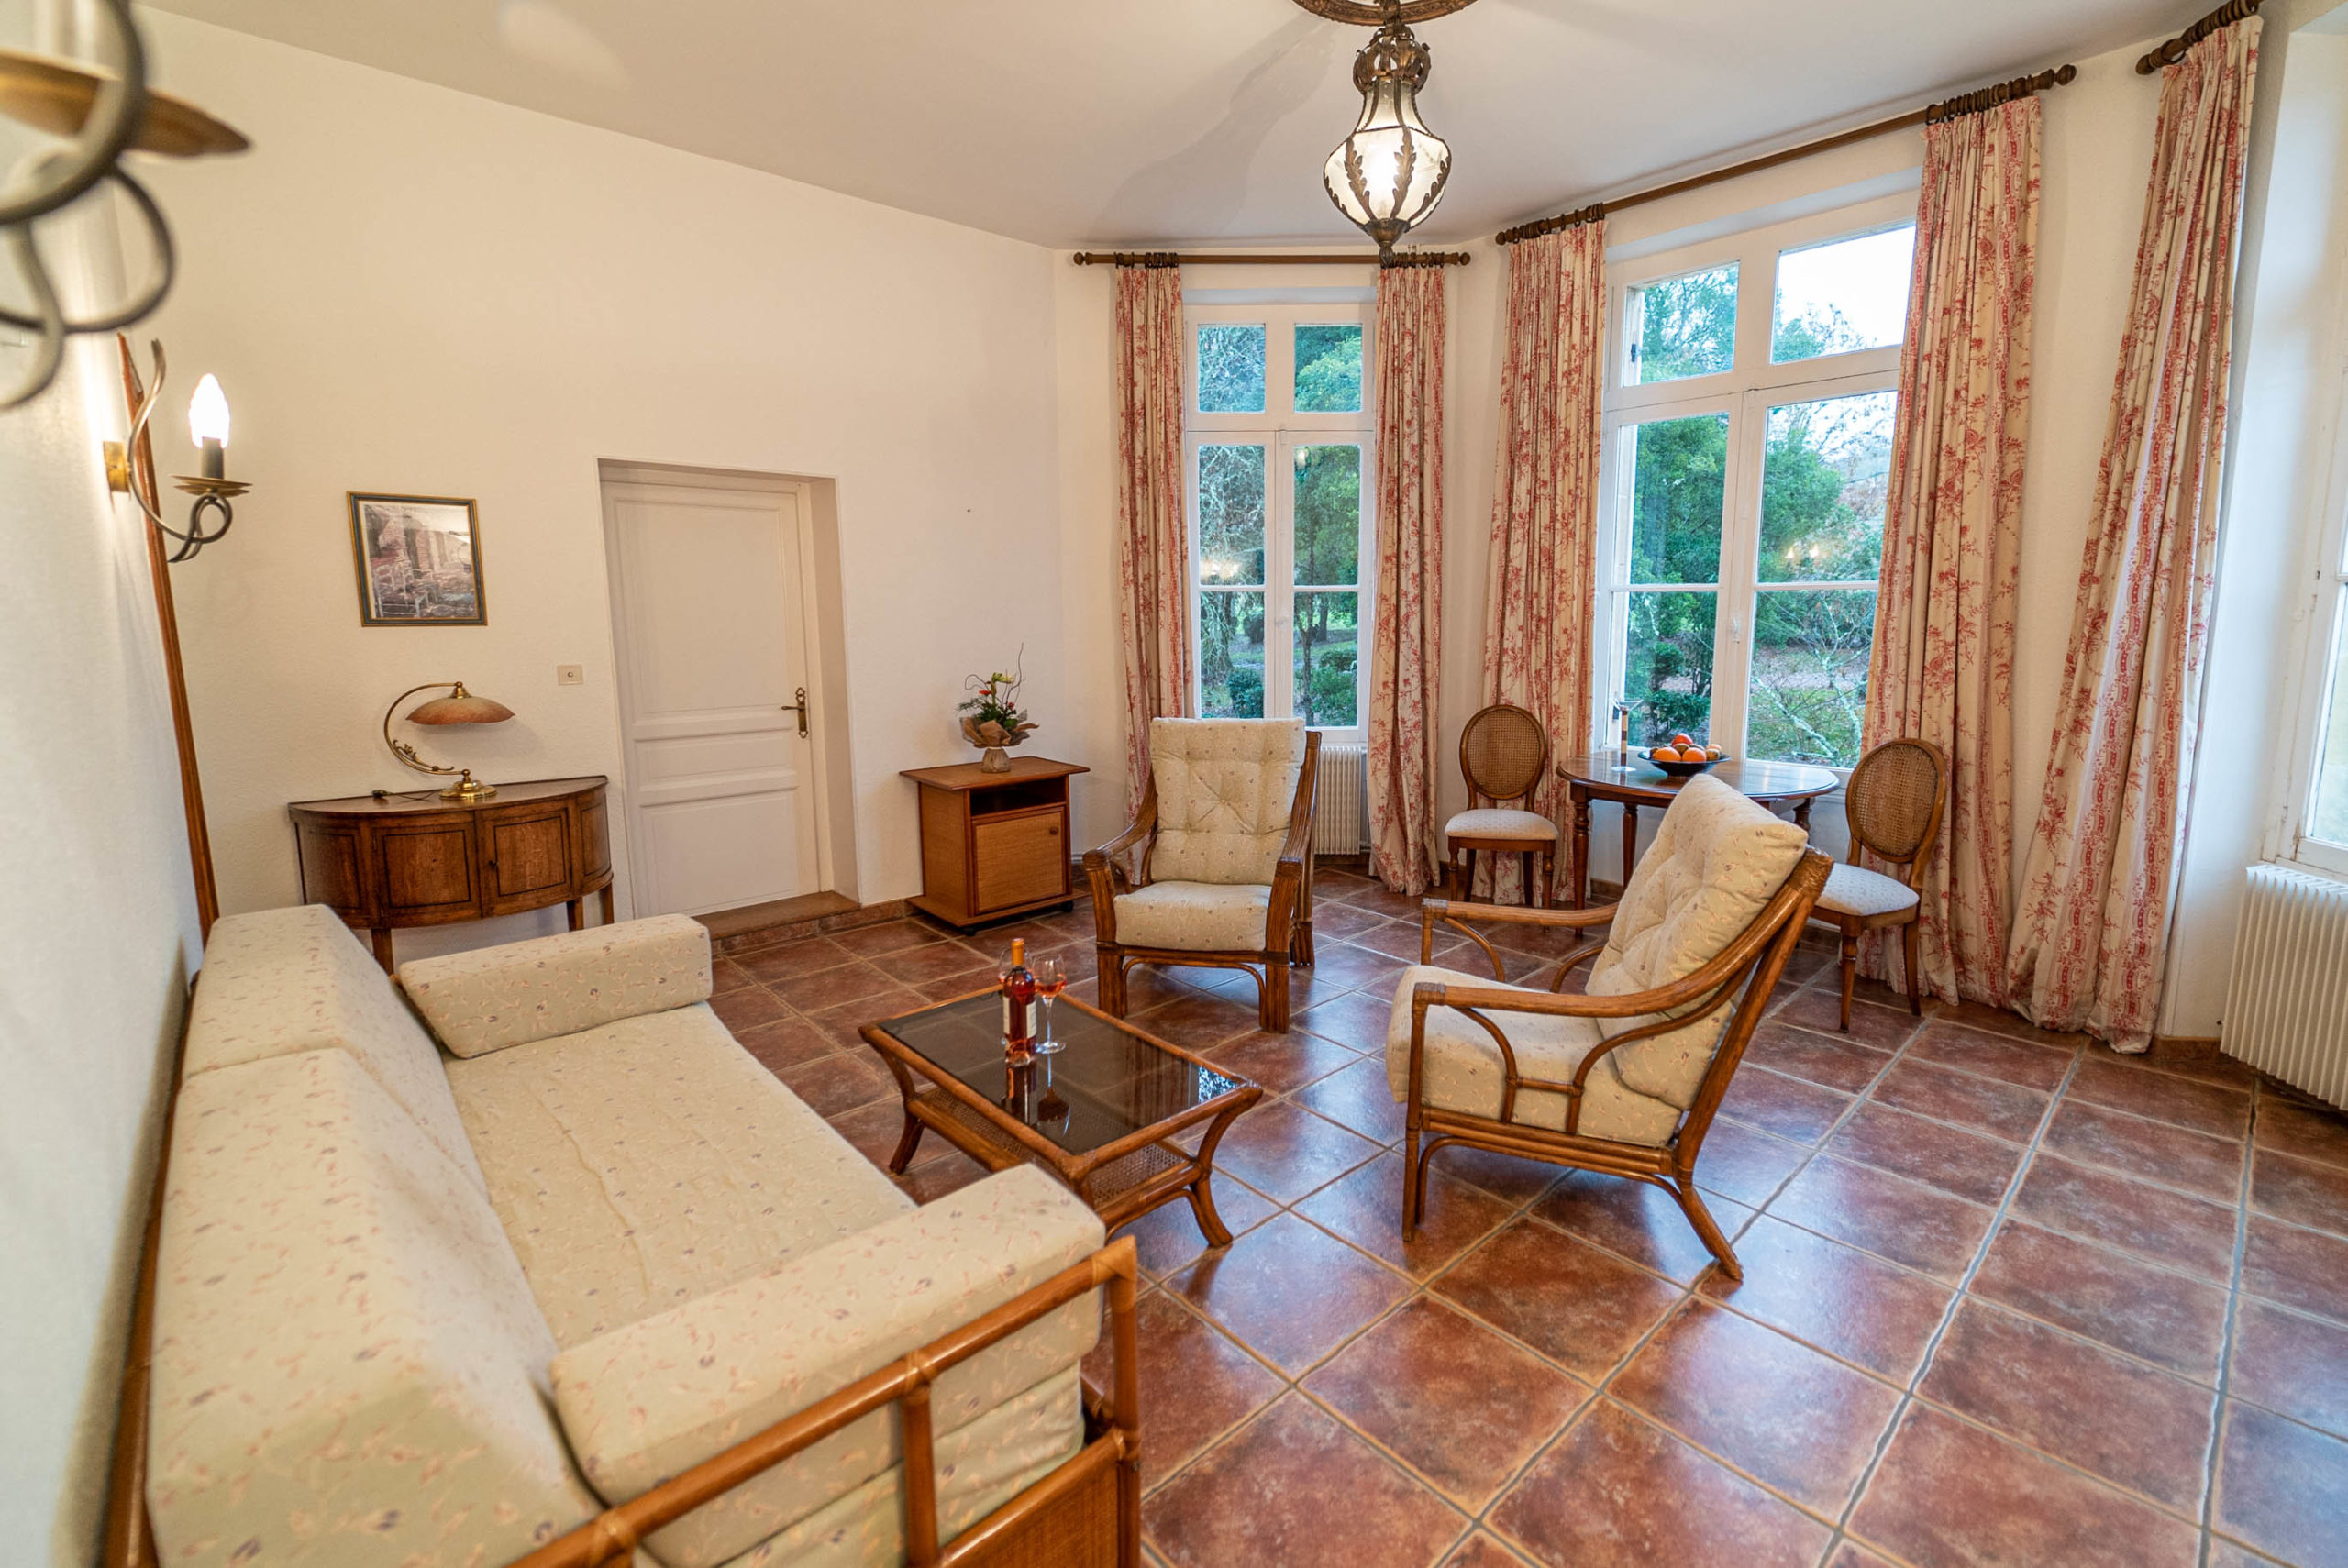 Salon suite marquise chateau Rauly location bergerac Monbazillac